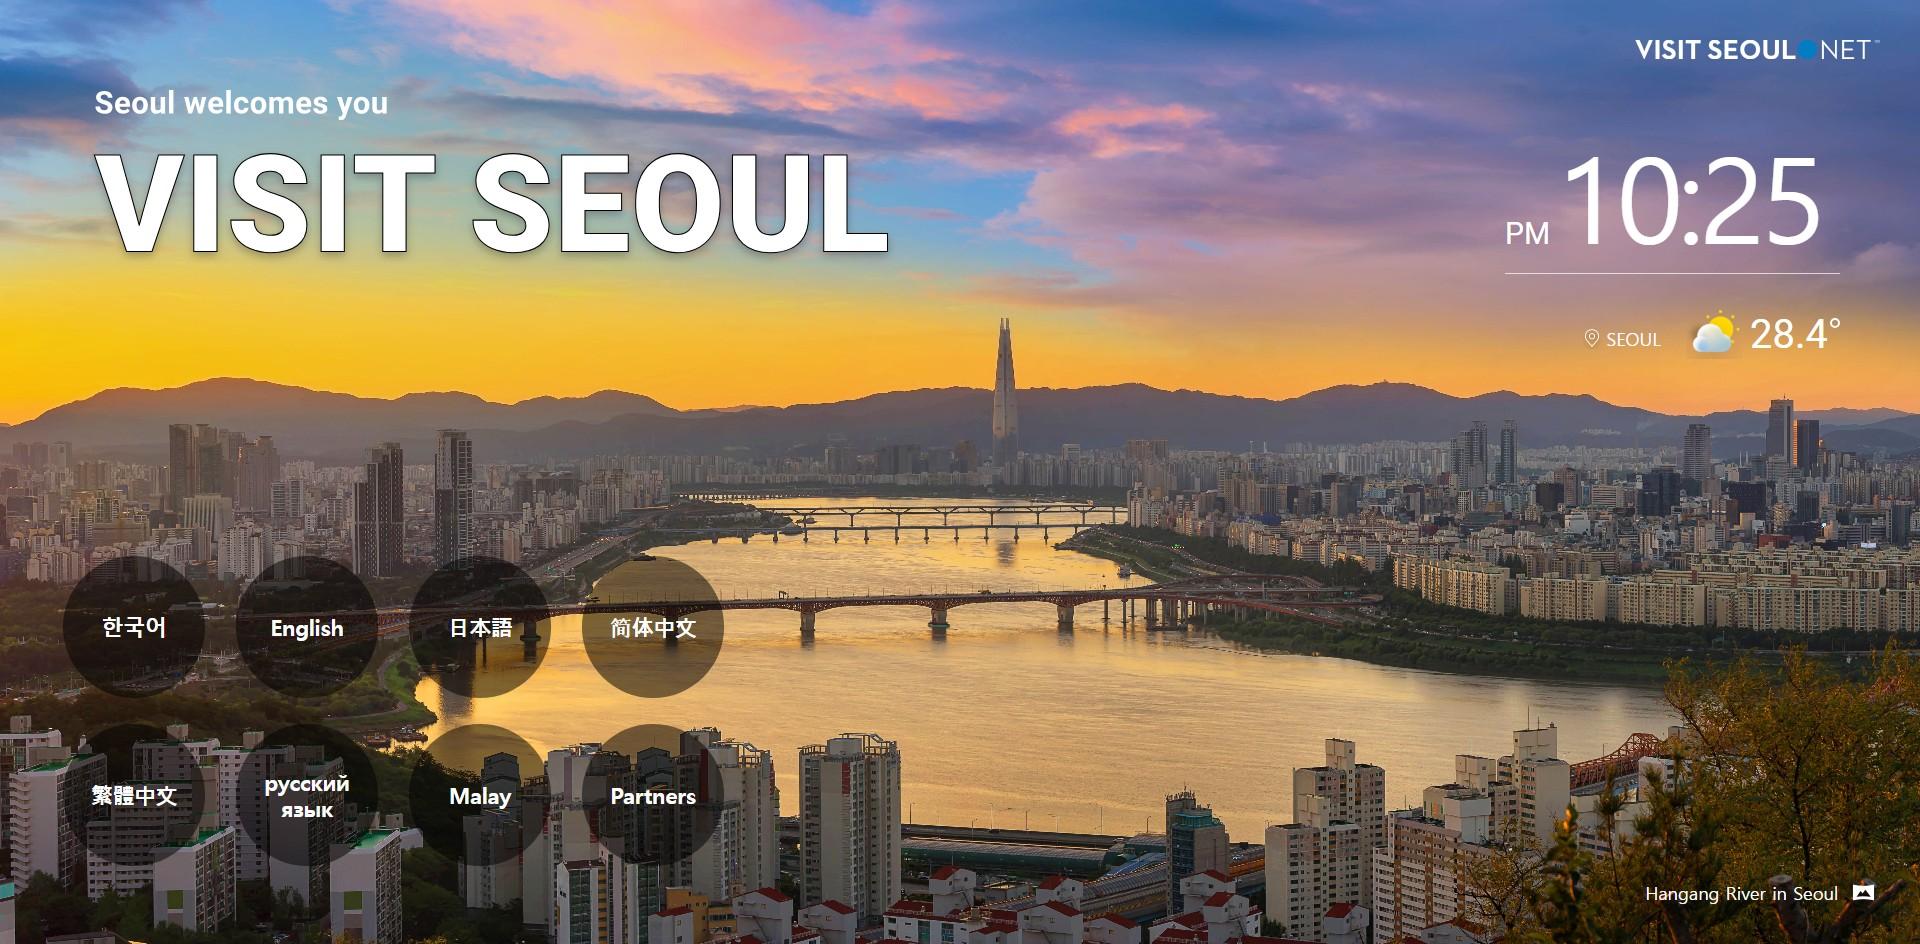 Start planning your trip to Seoul,South Korea